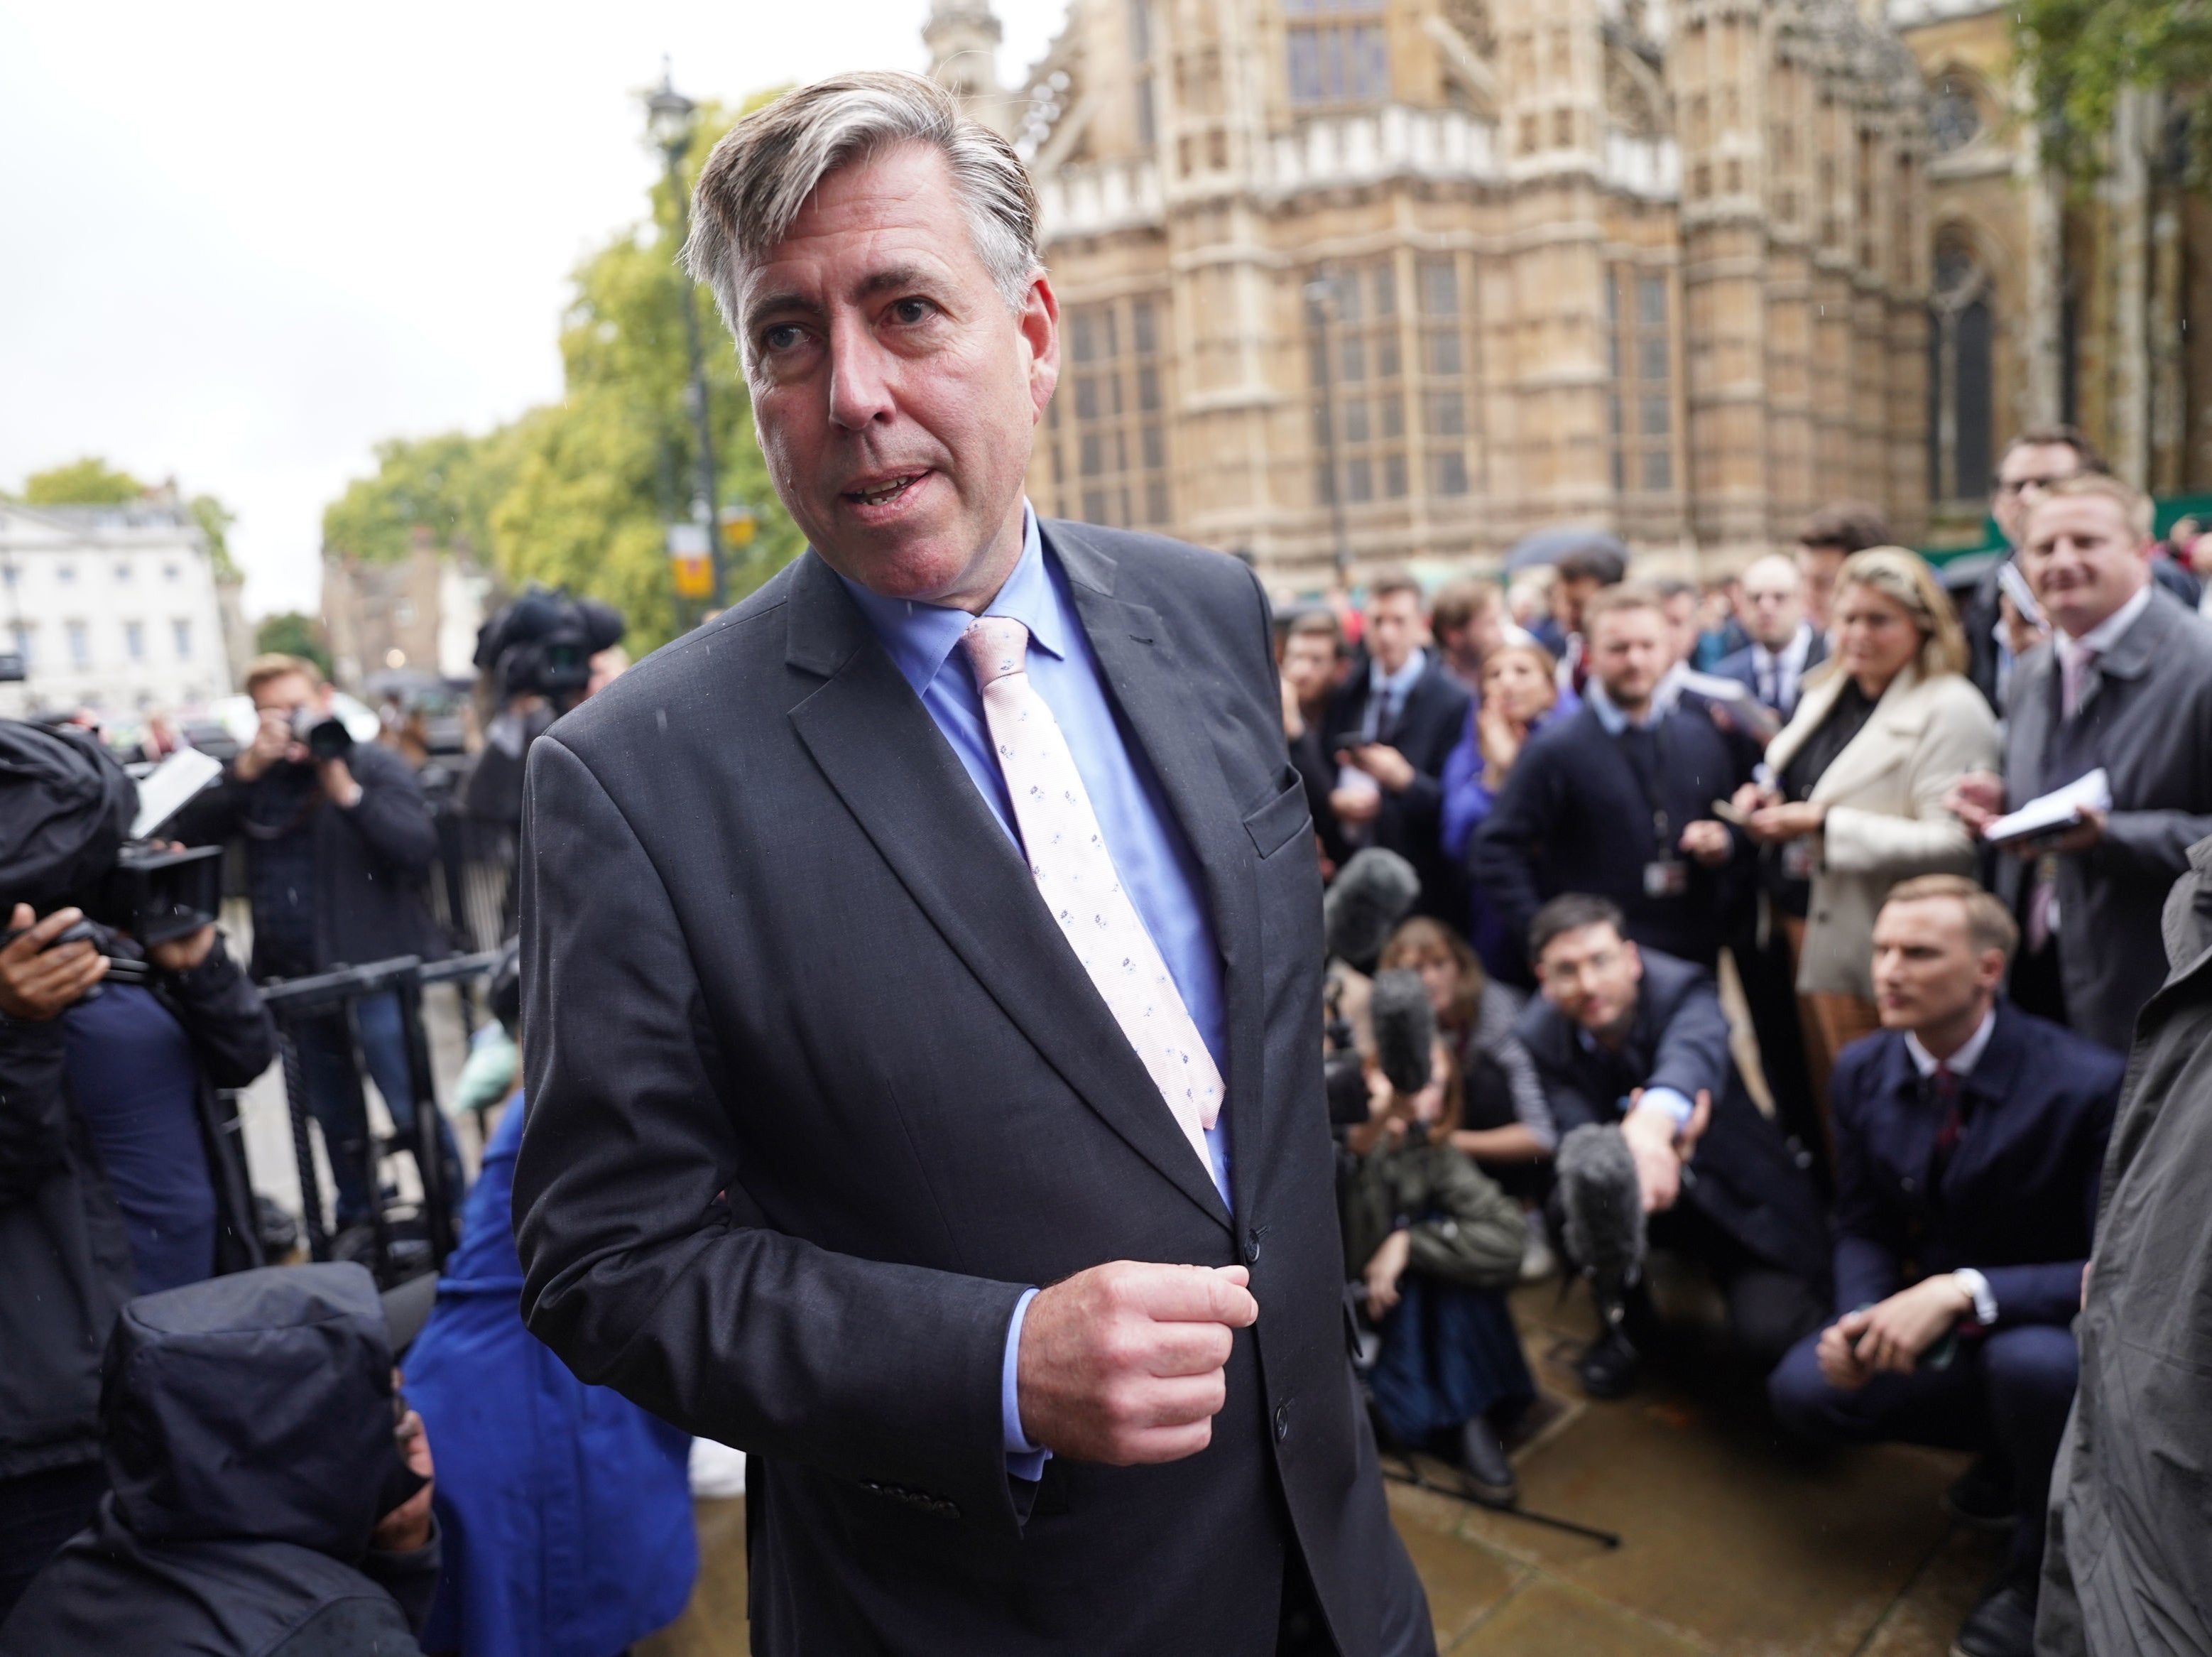 Chair of the 1922 Committee Sir Graham Brady